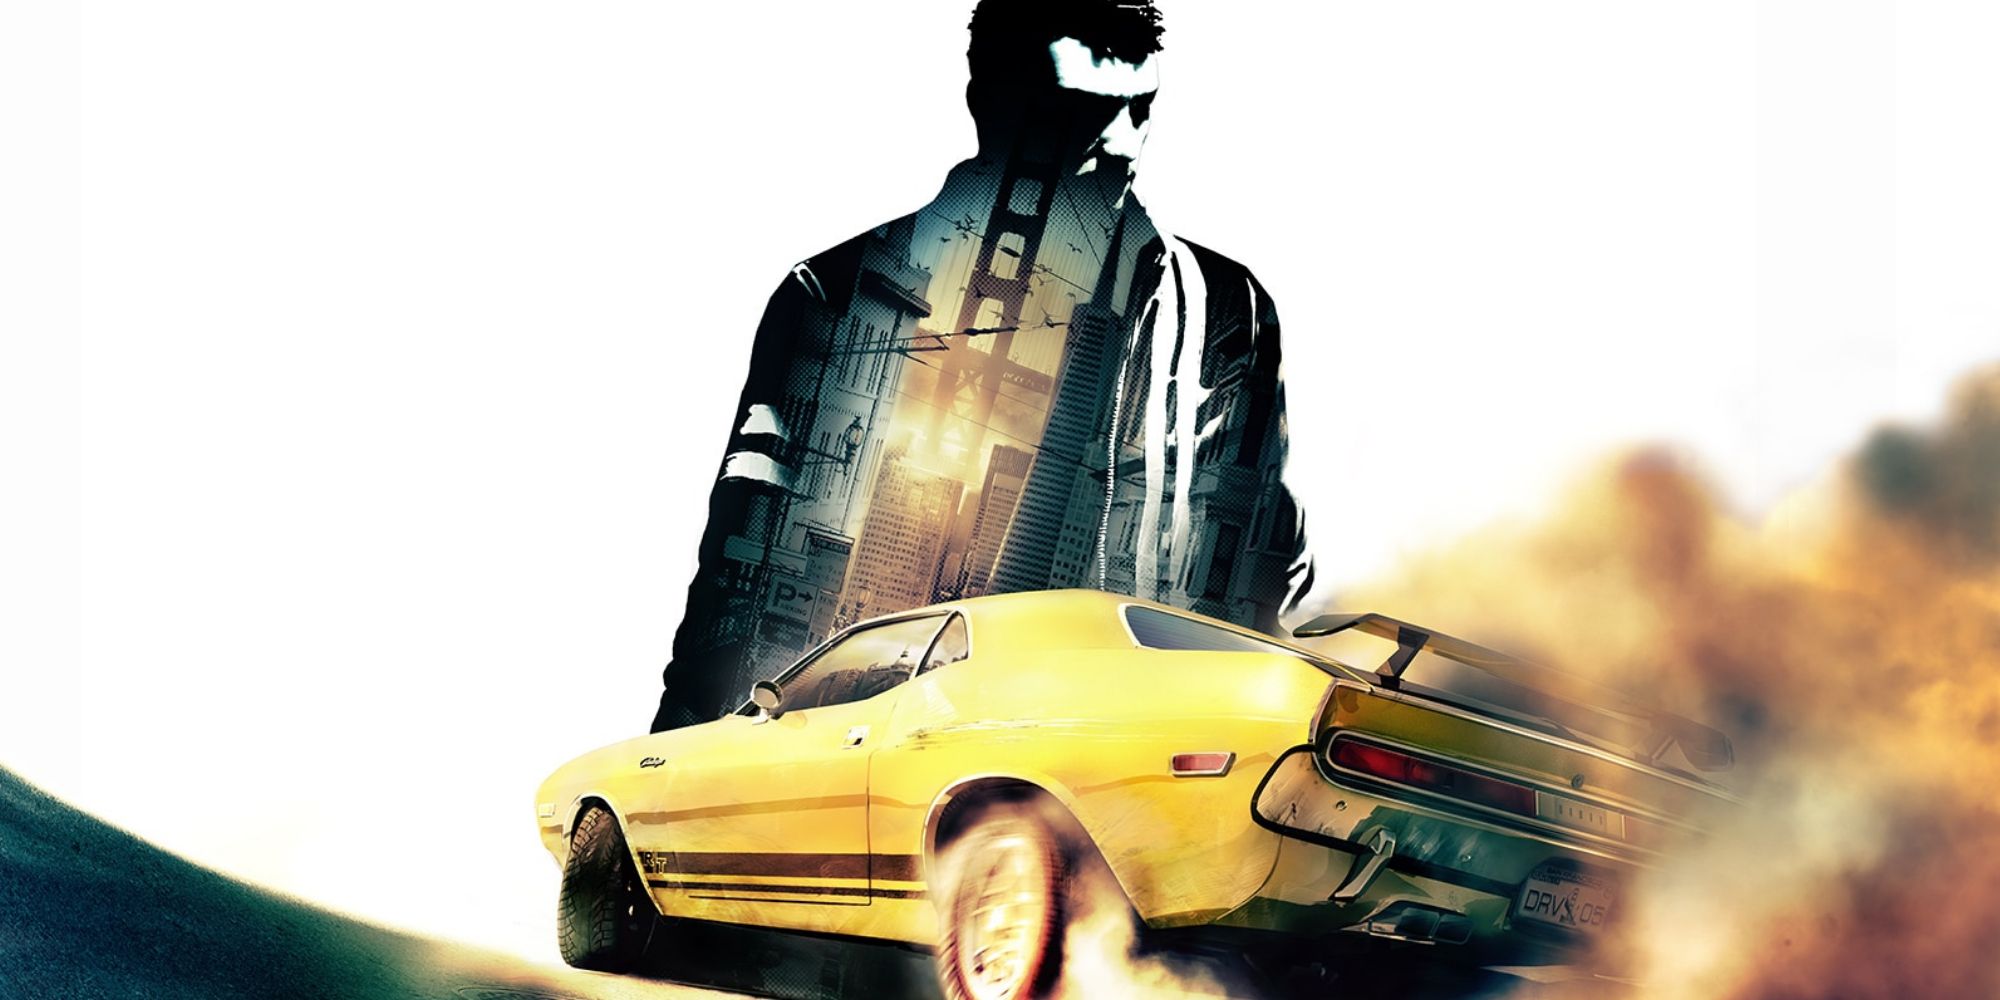 Key art for Driver: San Francisco, featuring protagonist John Tanner in silhouette with an image of the Golden Gate Bridge superimposed on him